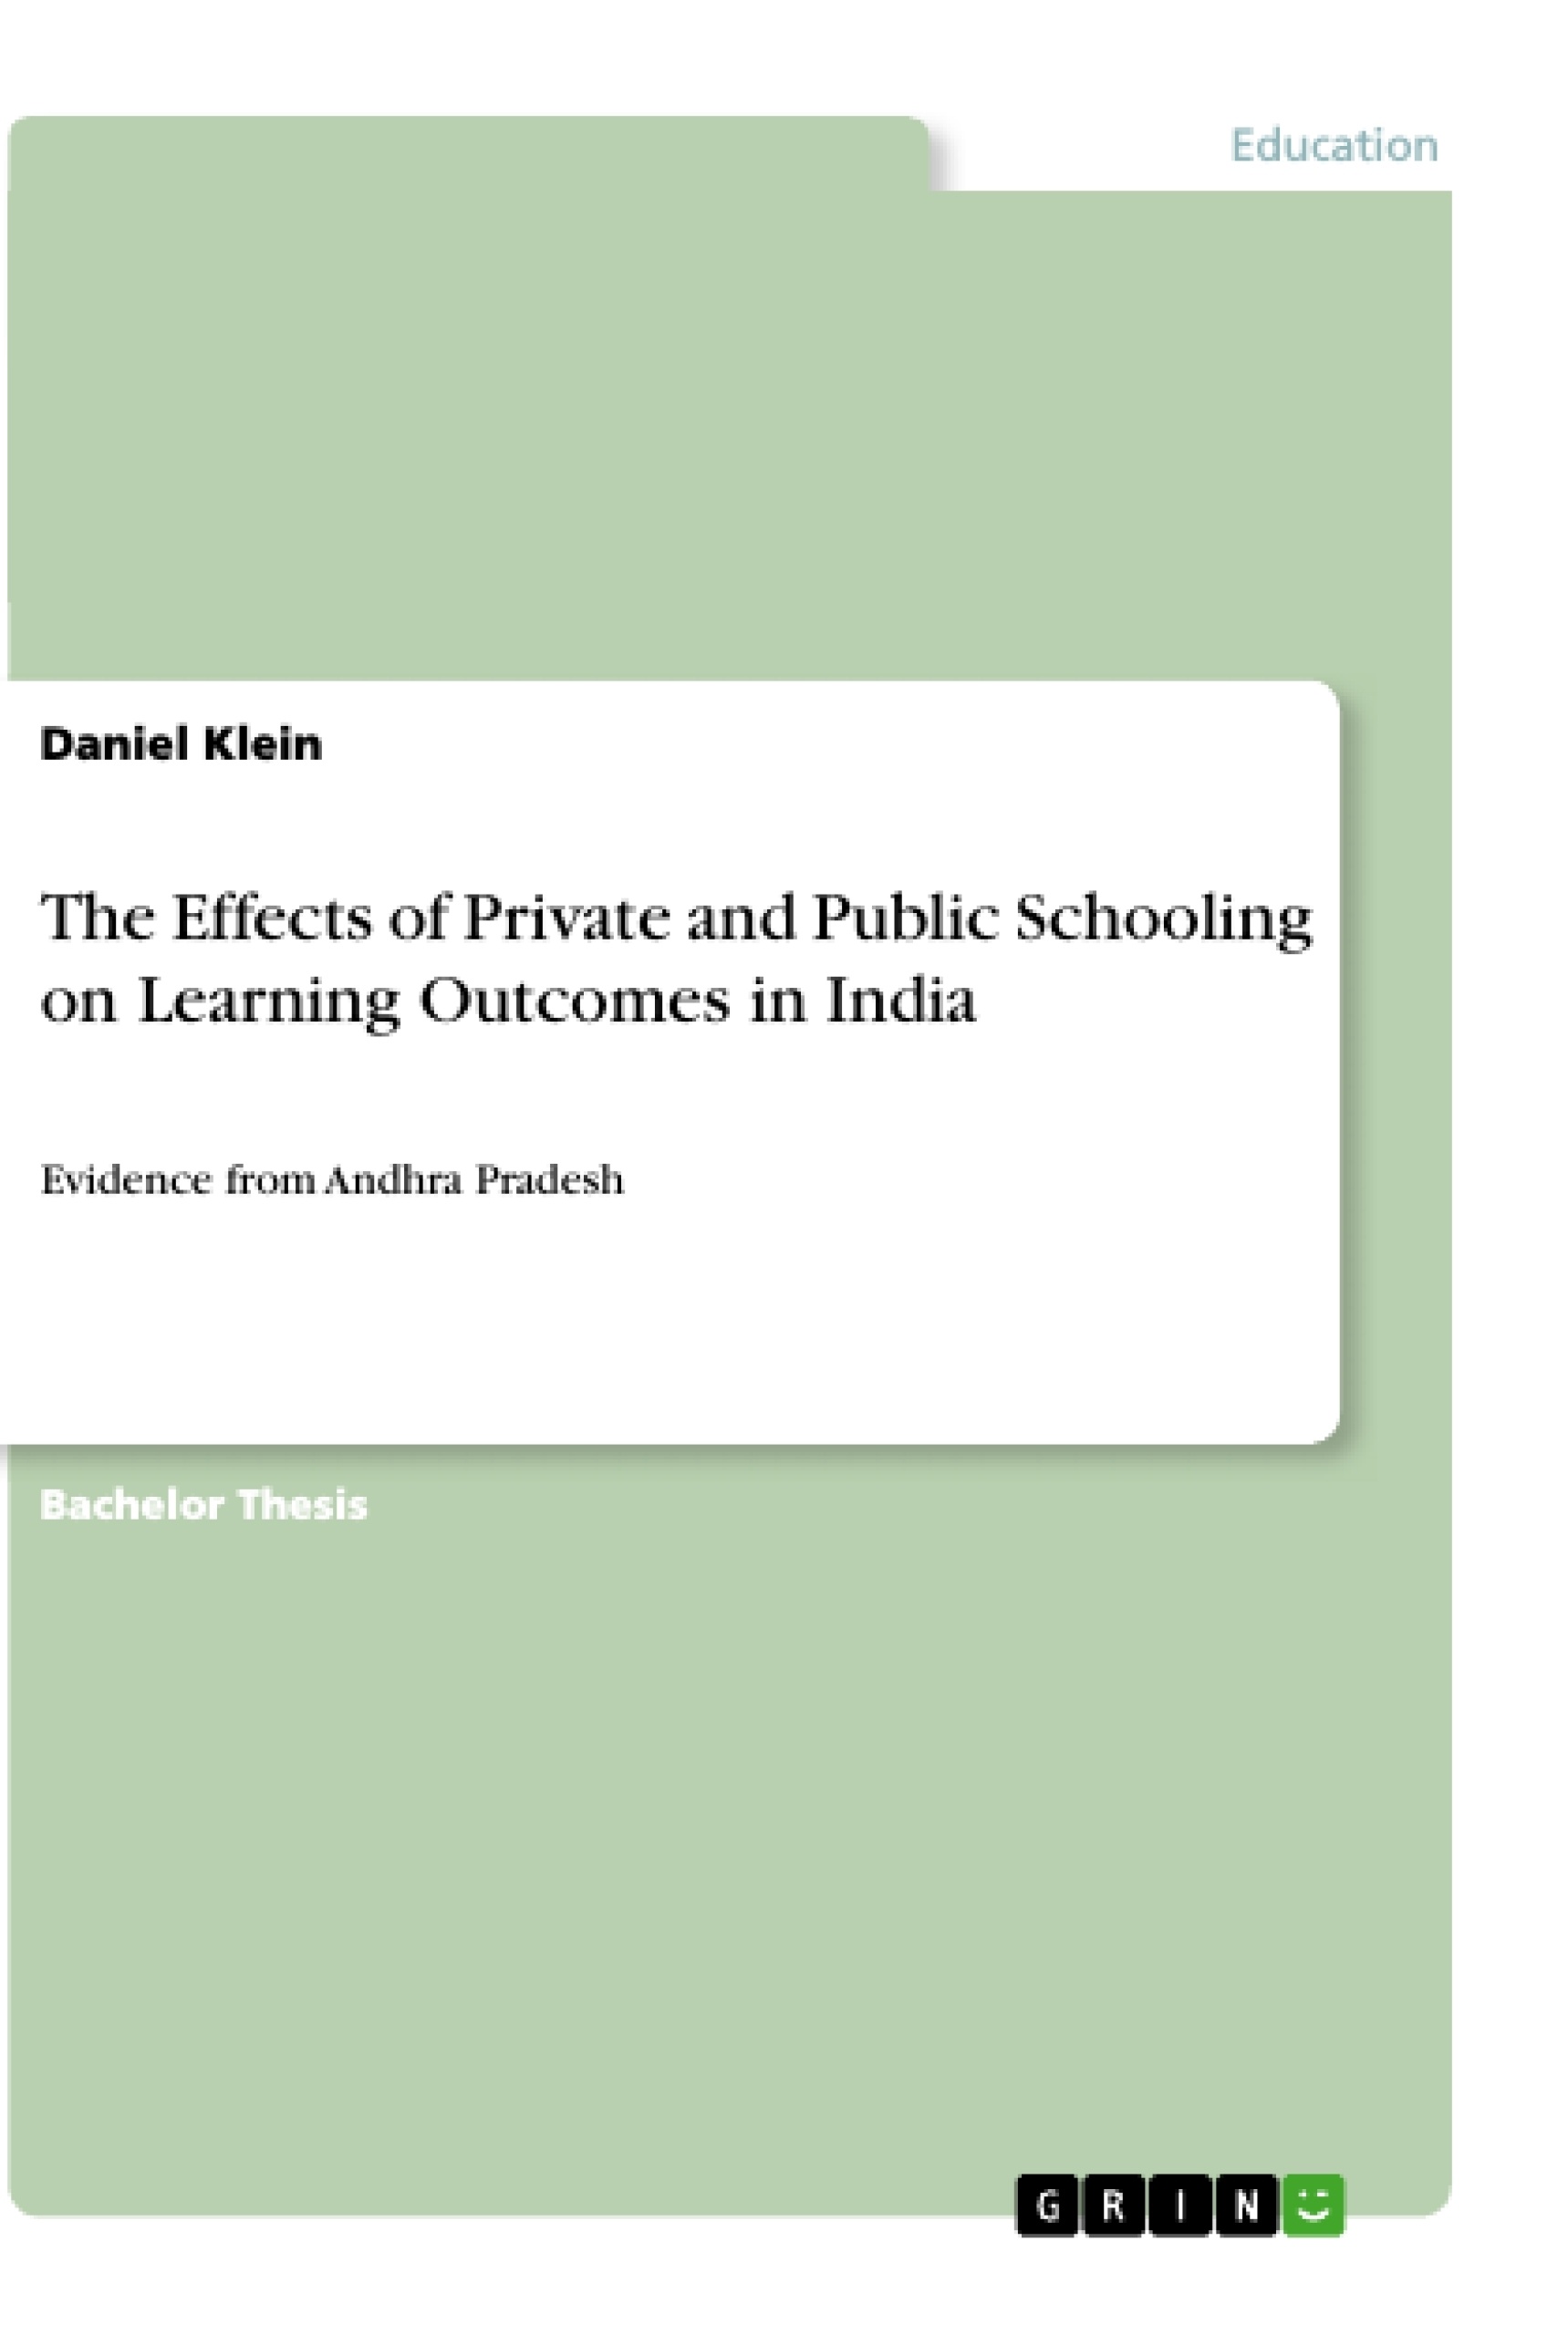 Title: The Effects of Private and Public Schooling on Learning Outcomes in India